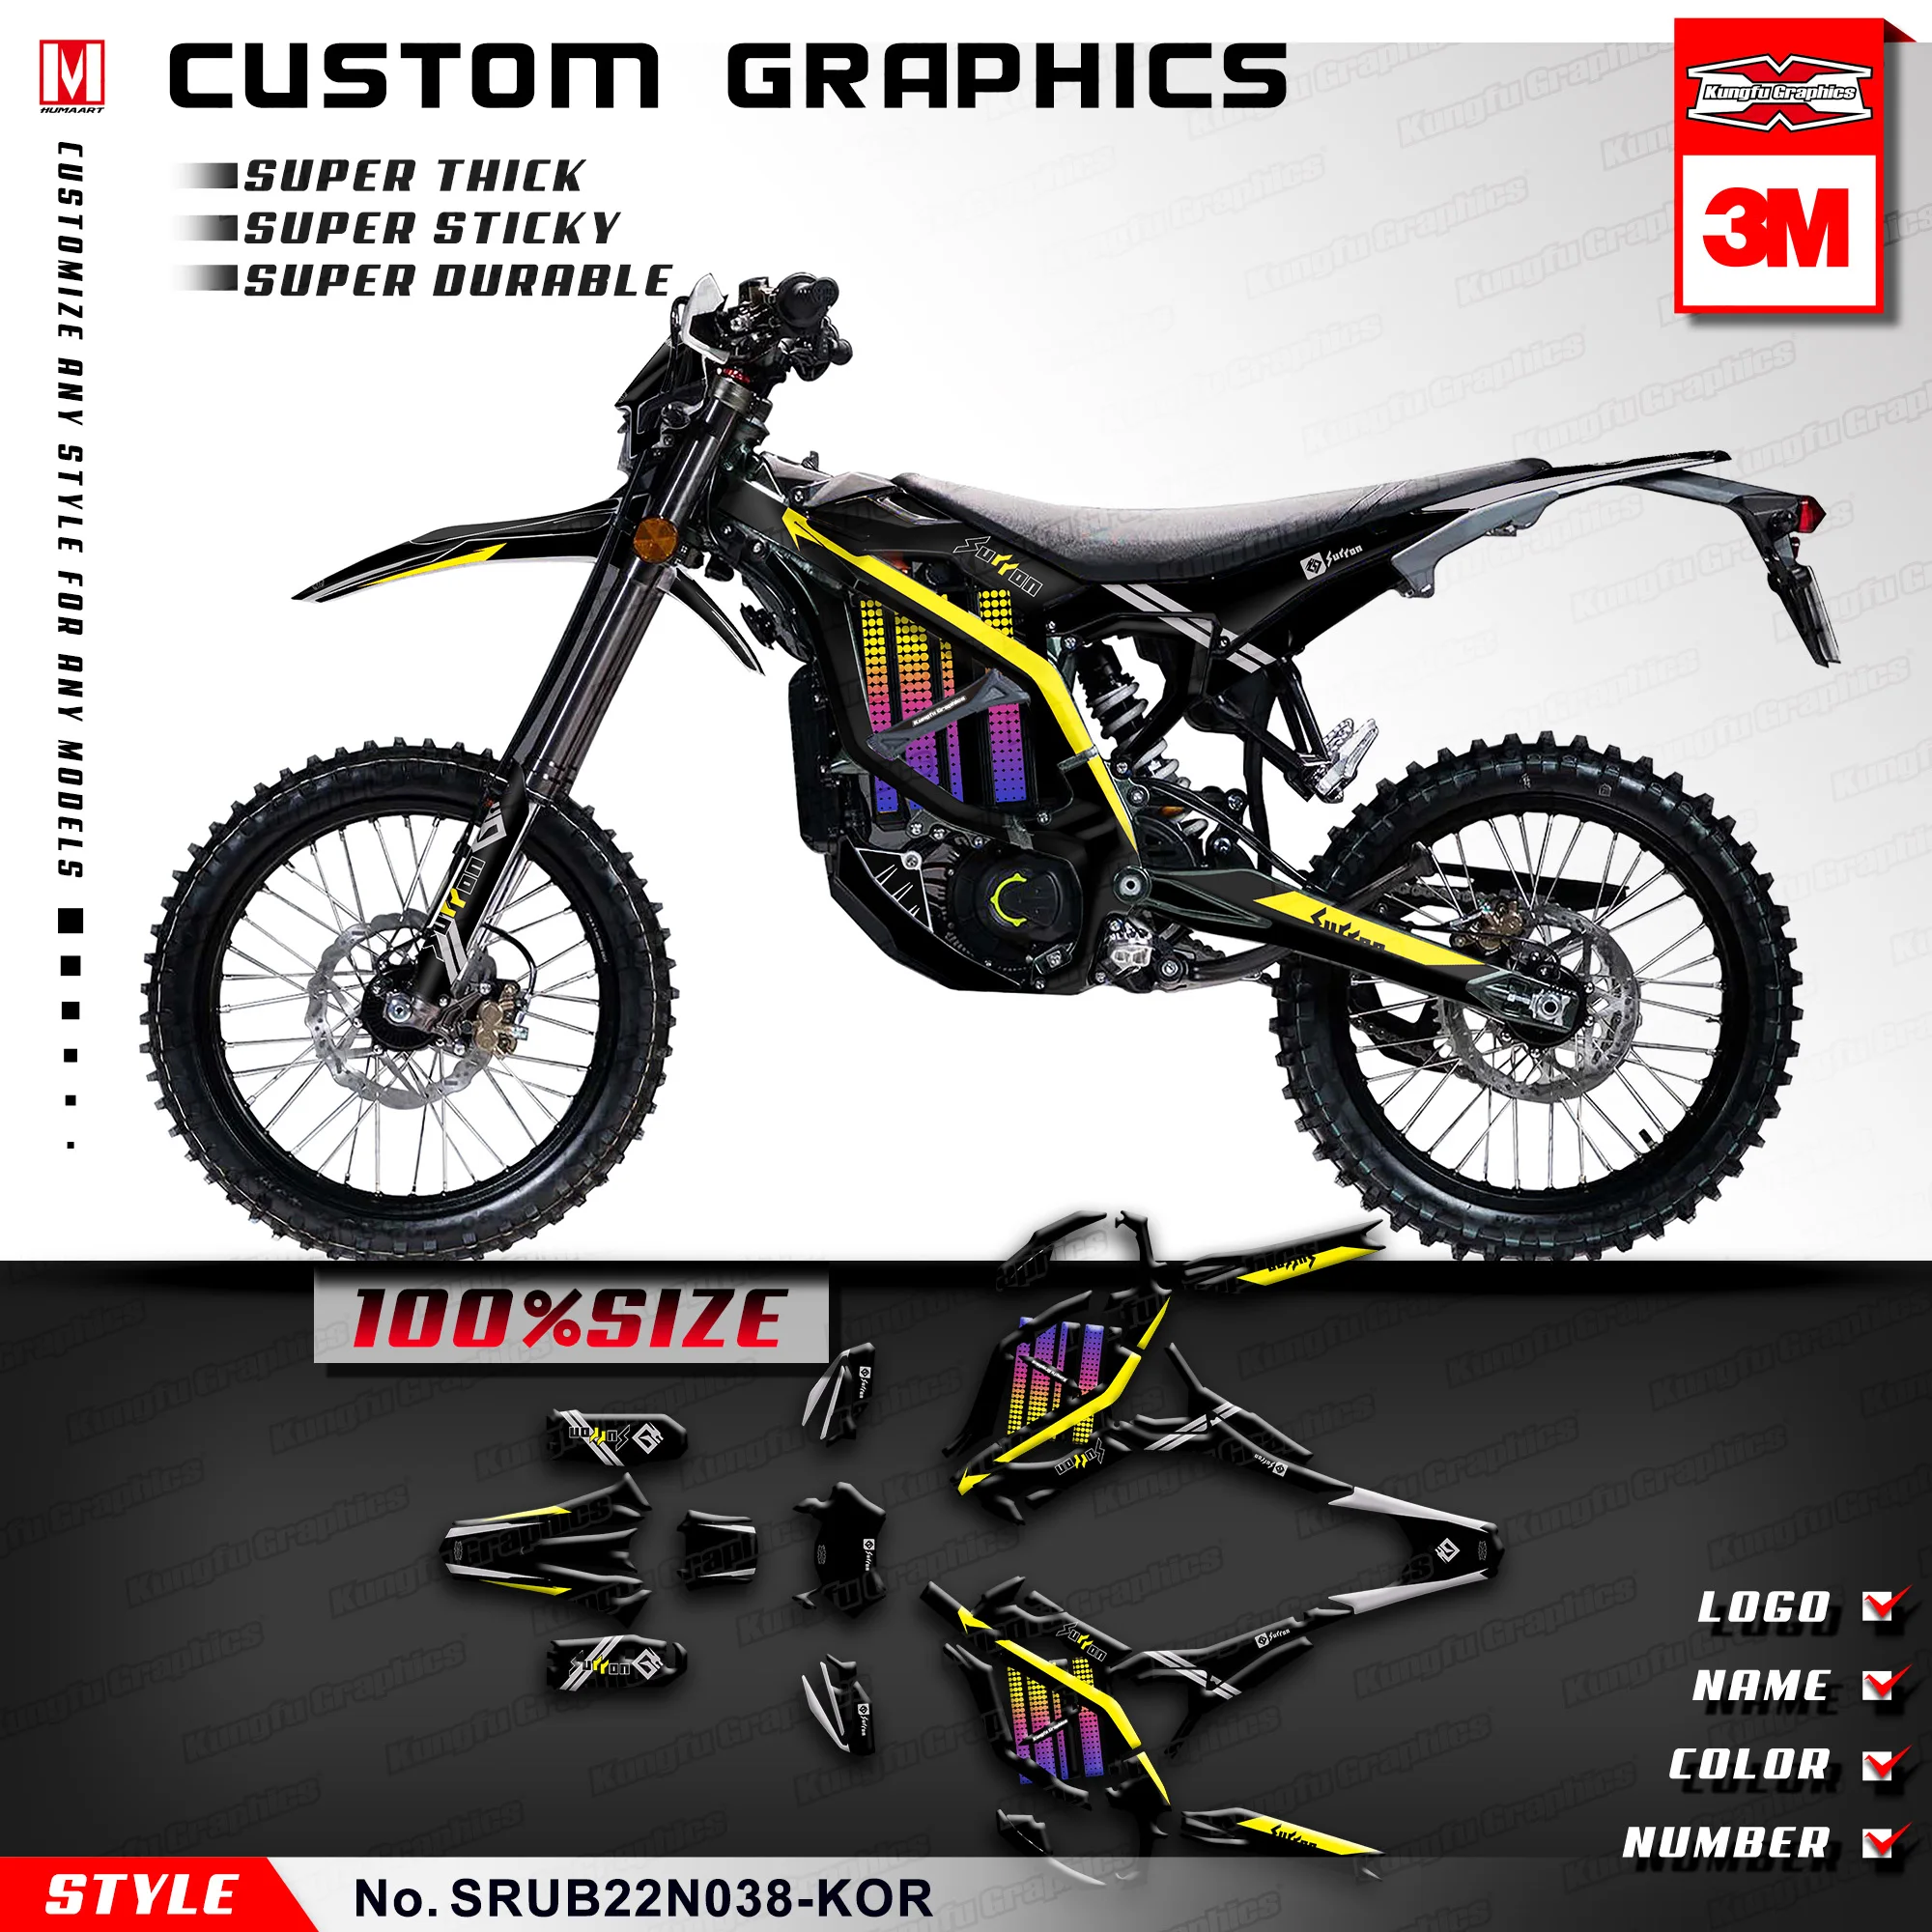 KUNGFU GRAPHICS Adhesives Stickers Custom Decal Kit Full Wrap for Sur-Ron Ultra Bee Dirt eBike SURRON, SRUB22N038-KOR kungfu graphics adhesives stickers custom decal kit full wrap for sur ron ultra bee dirt ebike surron srub22n042 kr